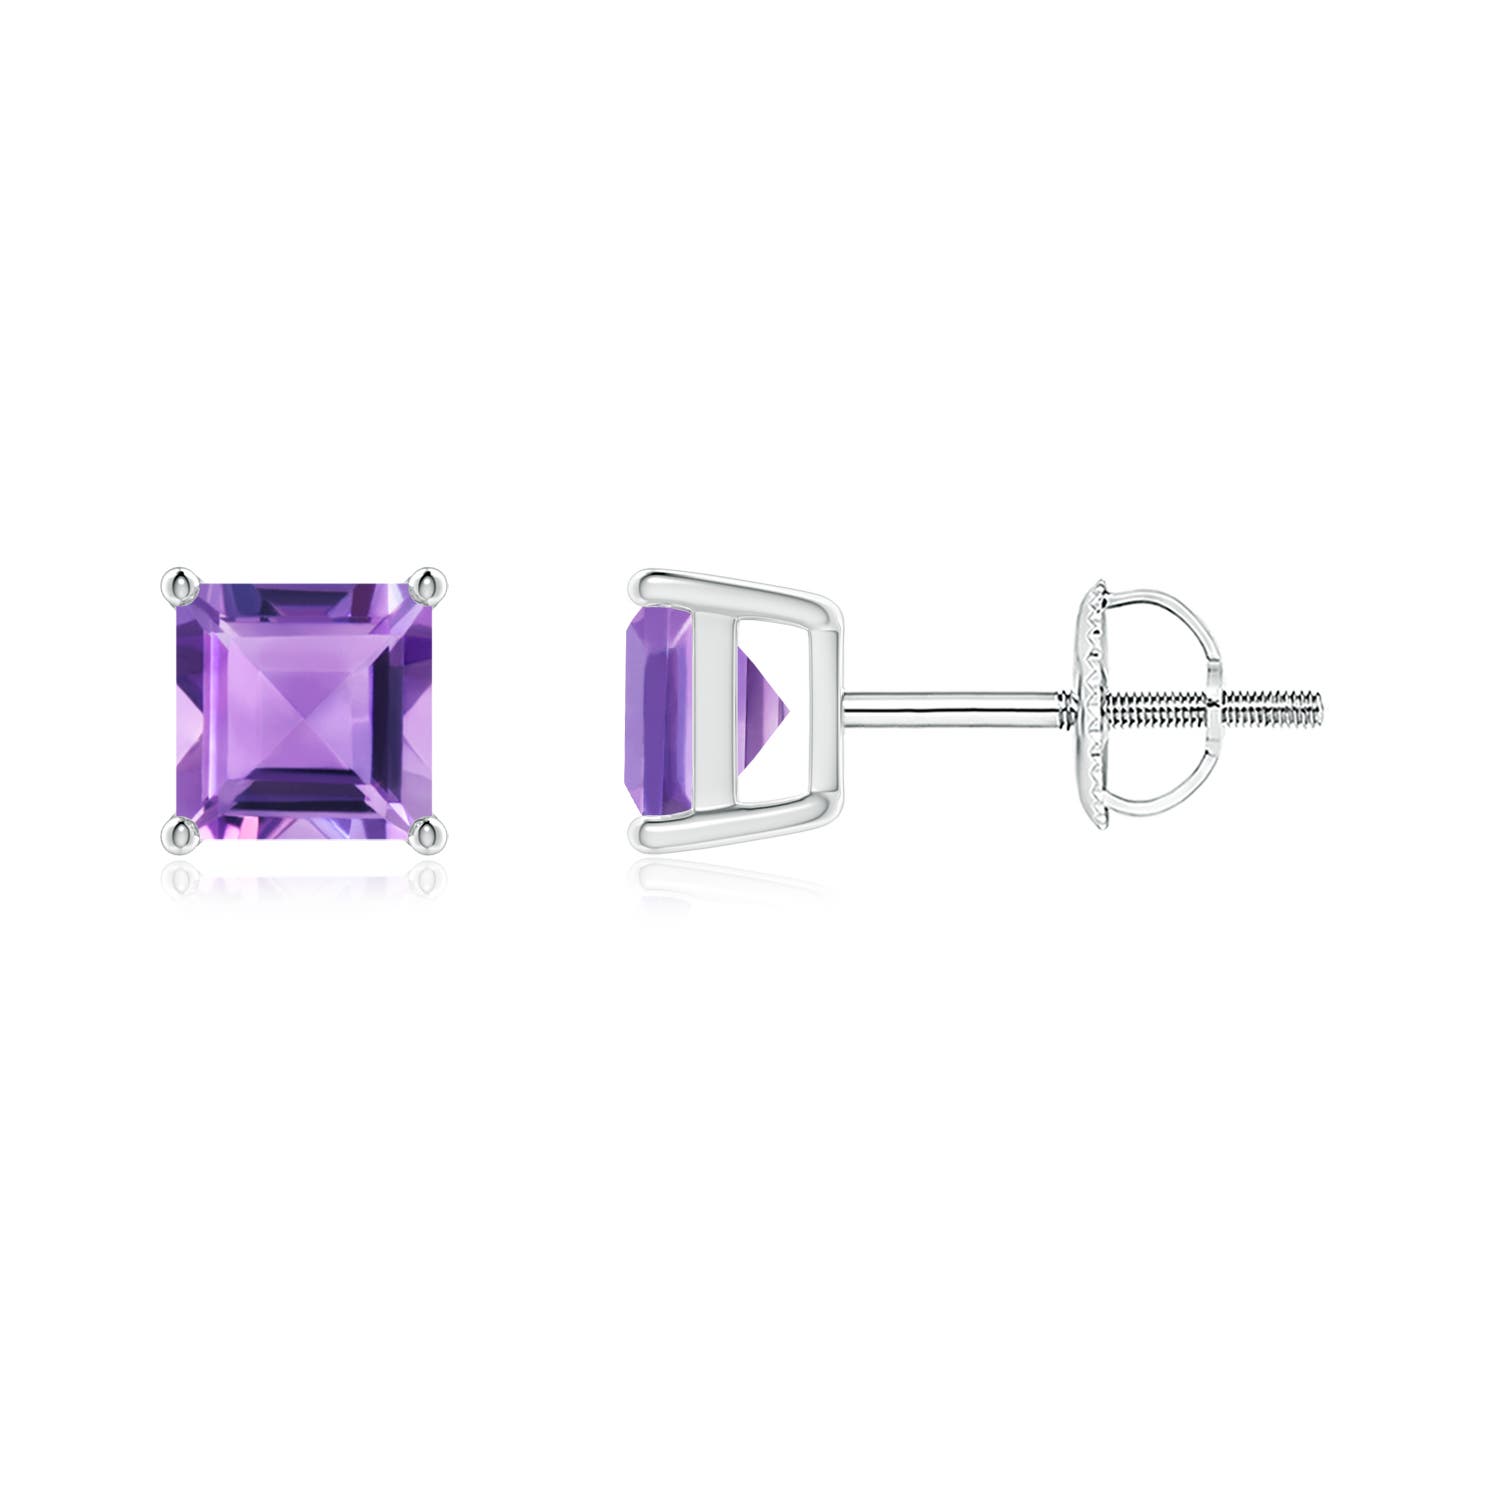 A - Amethyst / 1.4 CT / 14 KT White Gold